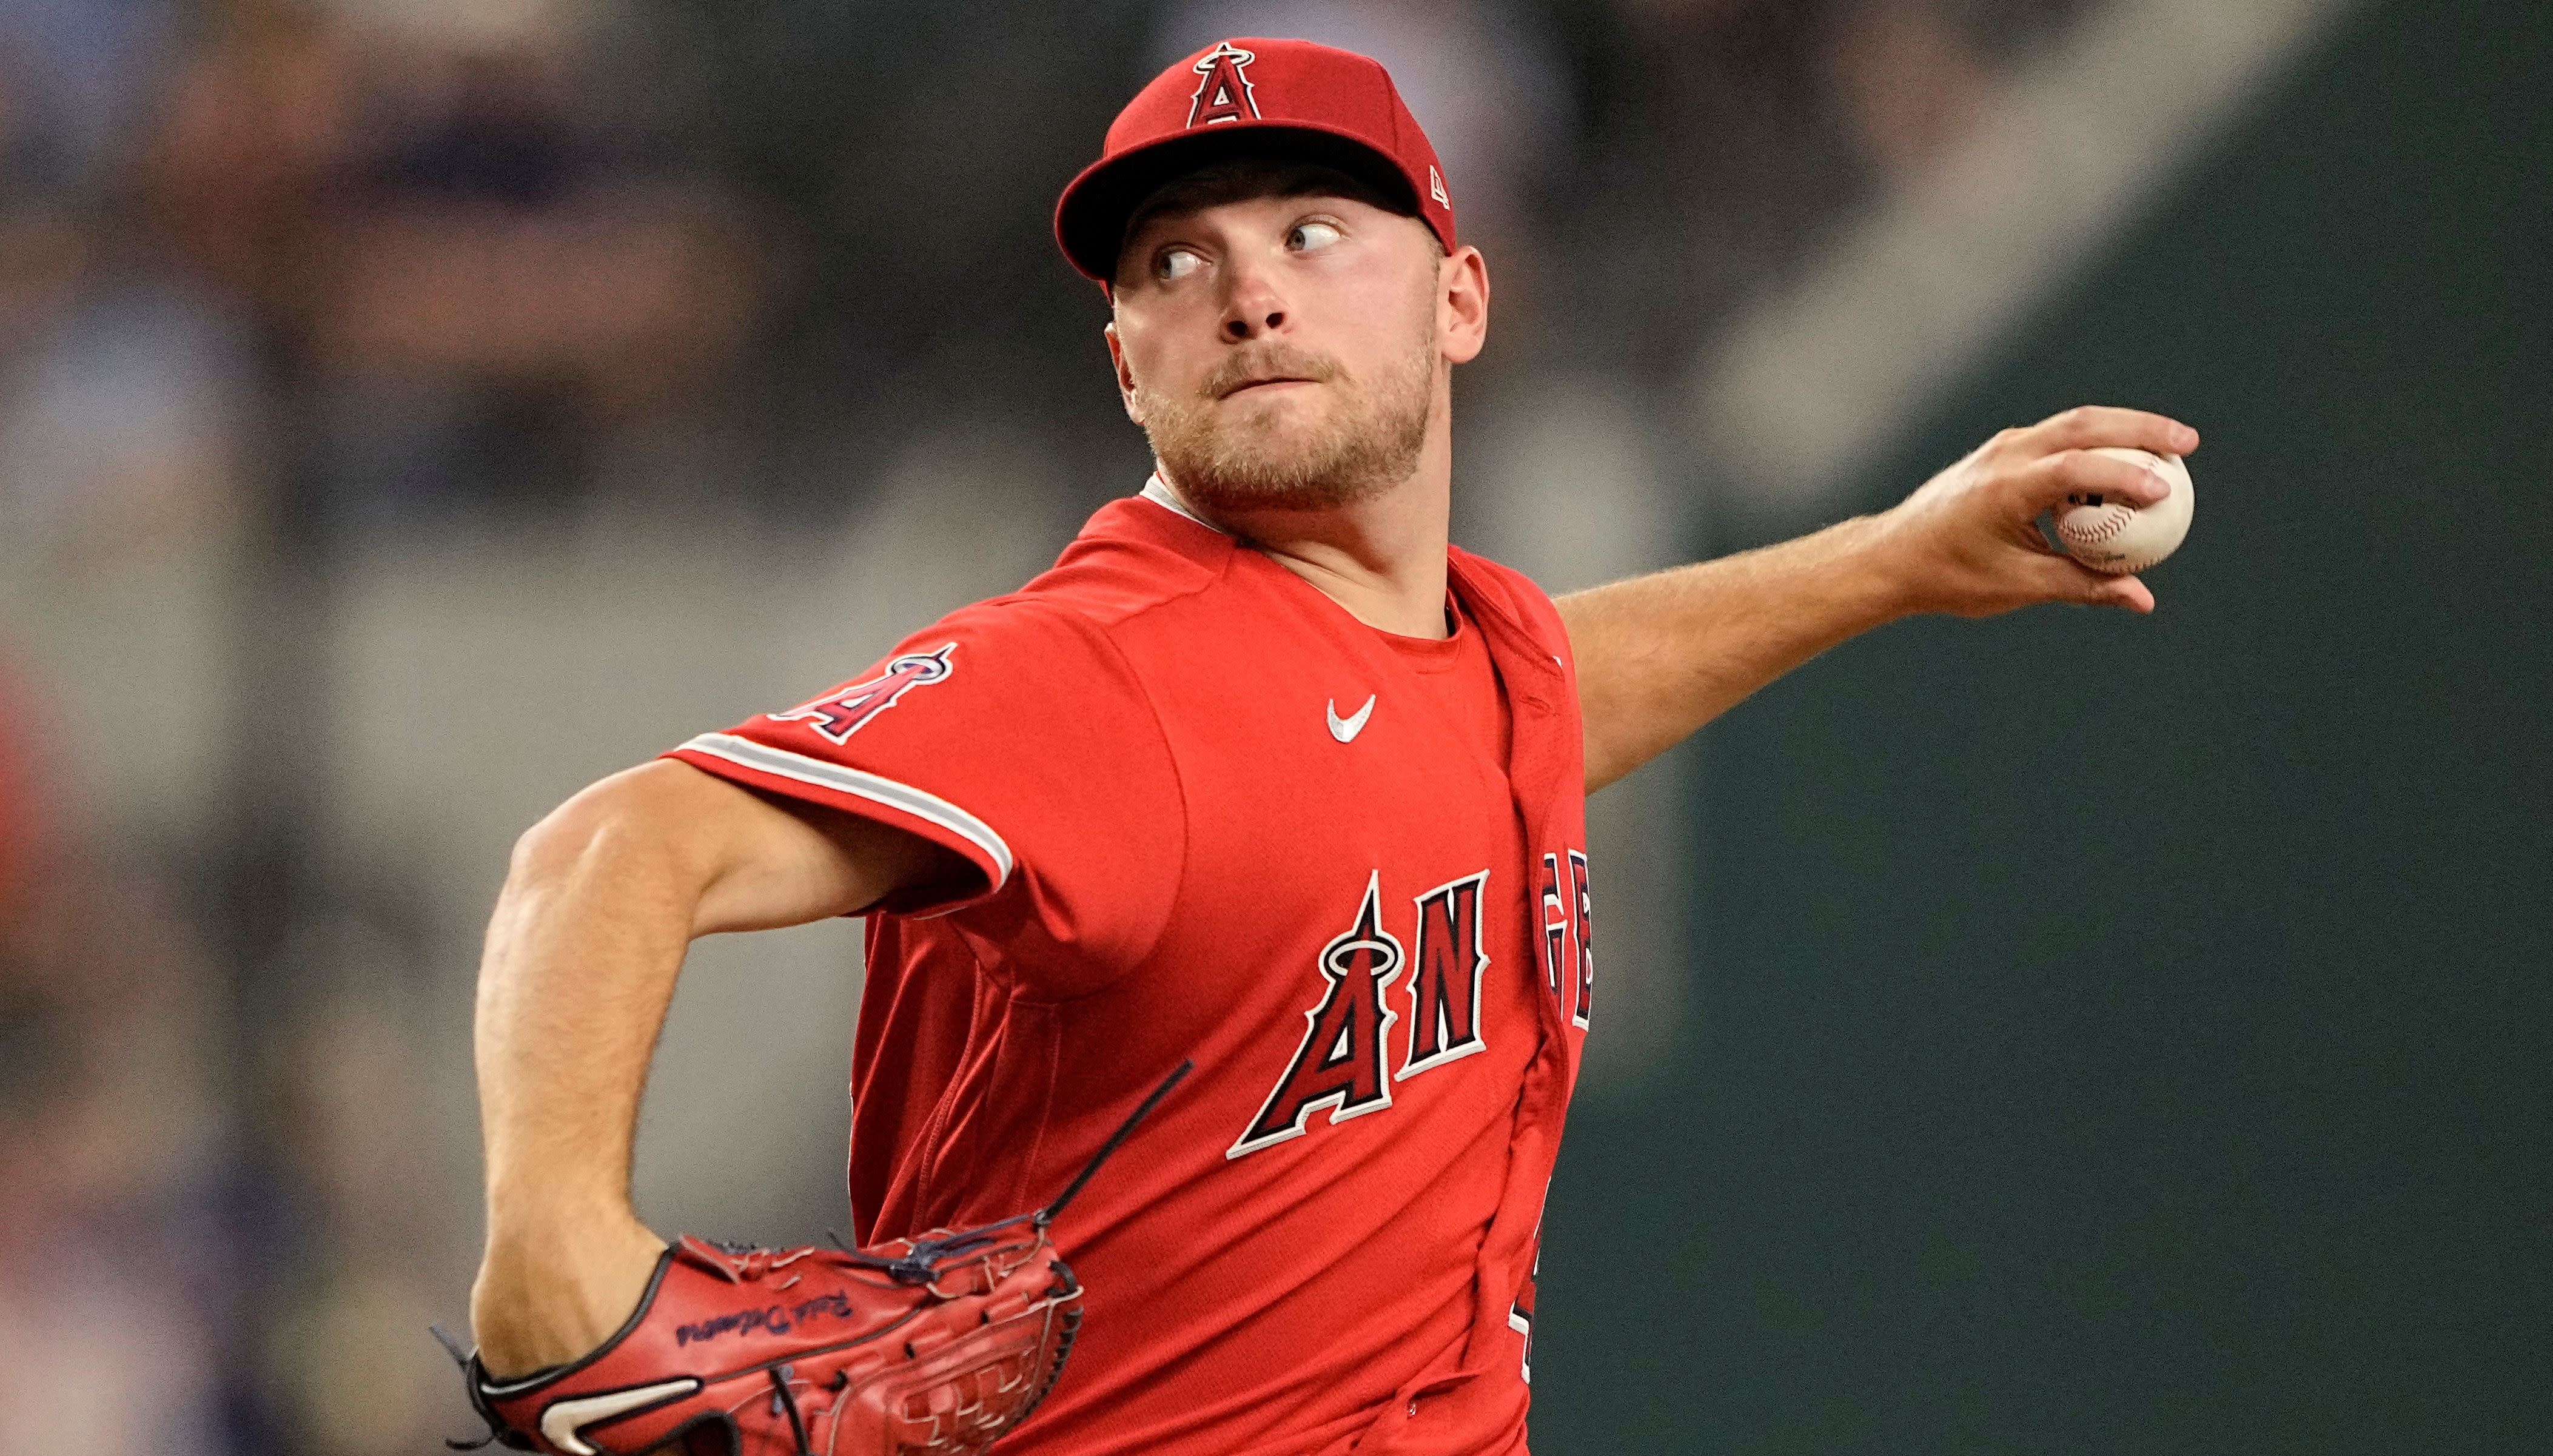 LAA's Detmers worth adding for strikeout potential